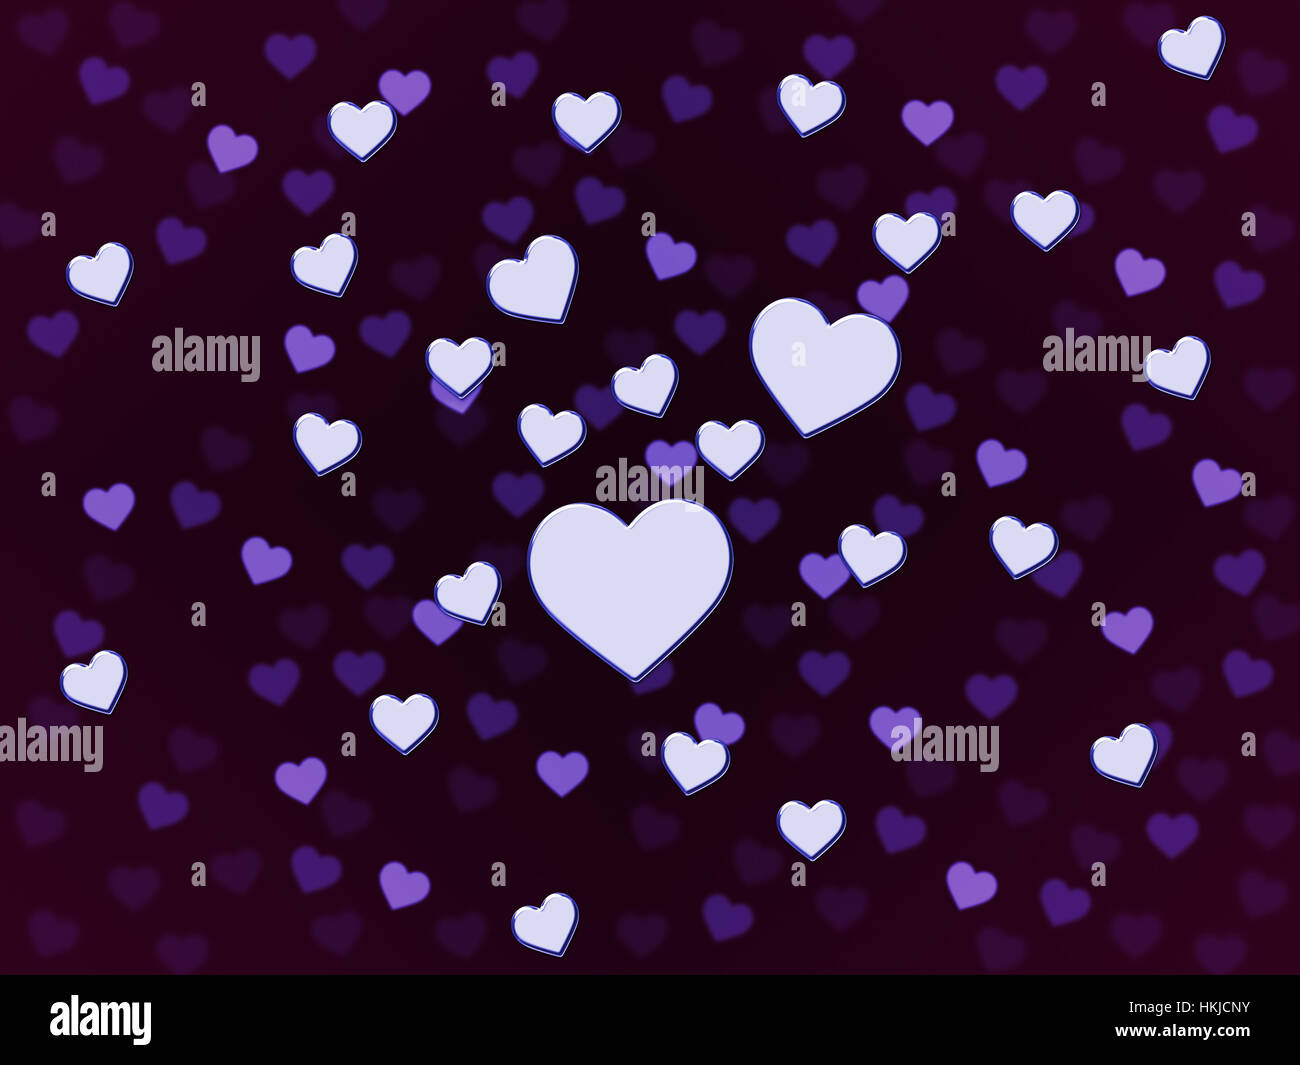 Purple Hearts Background Showing Romantic And Passionate Wallpaper Stock Photo